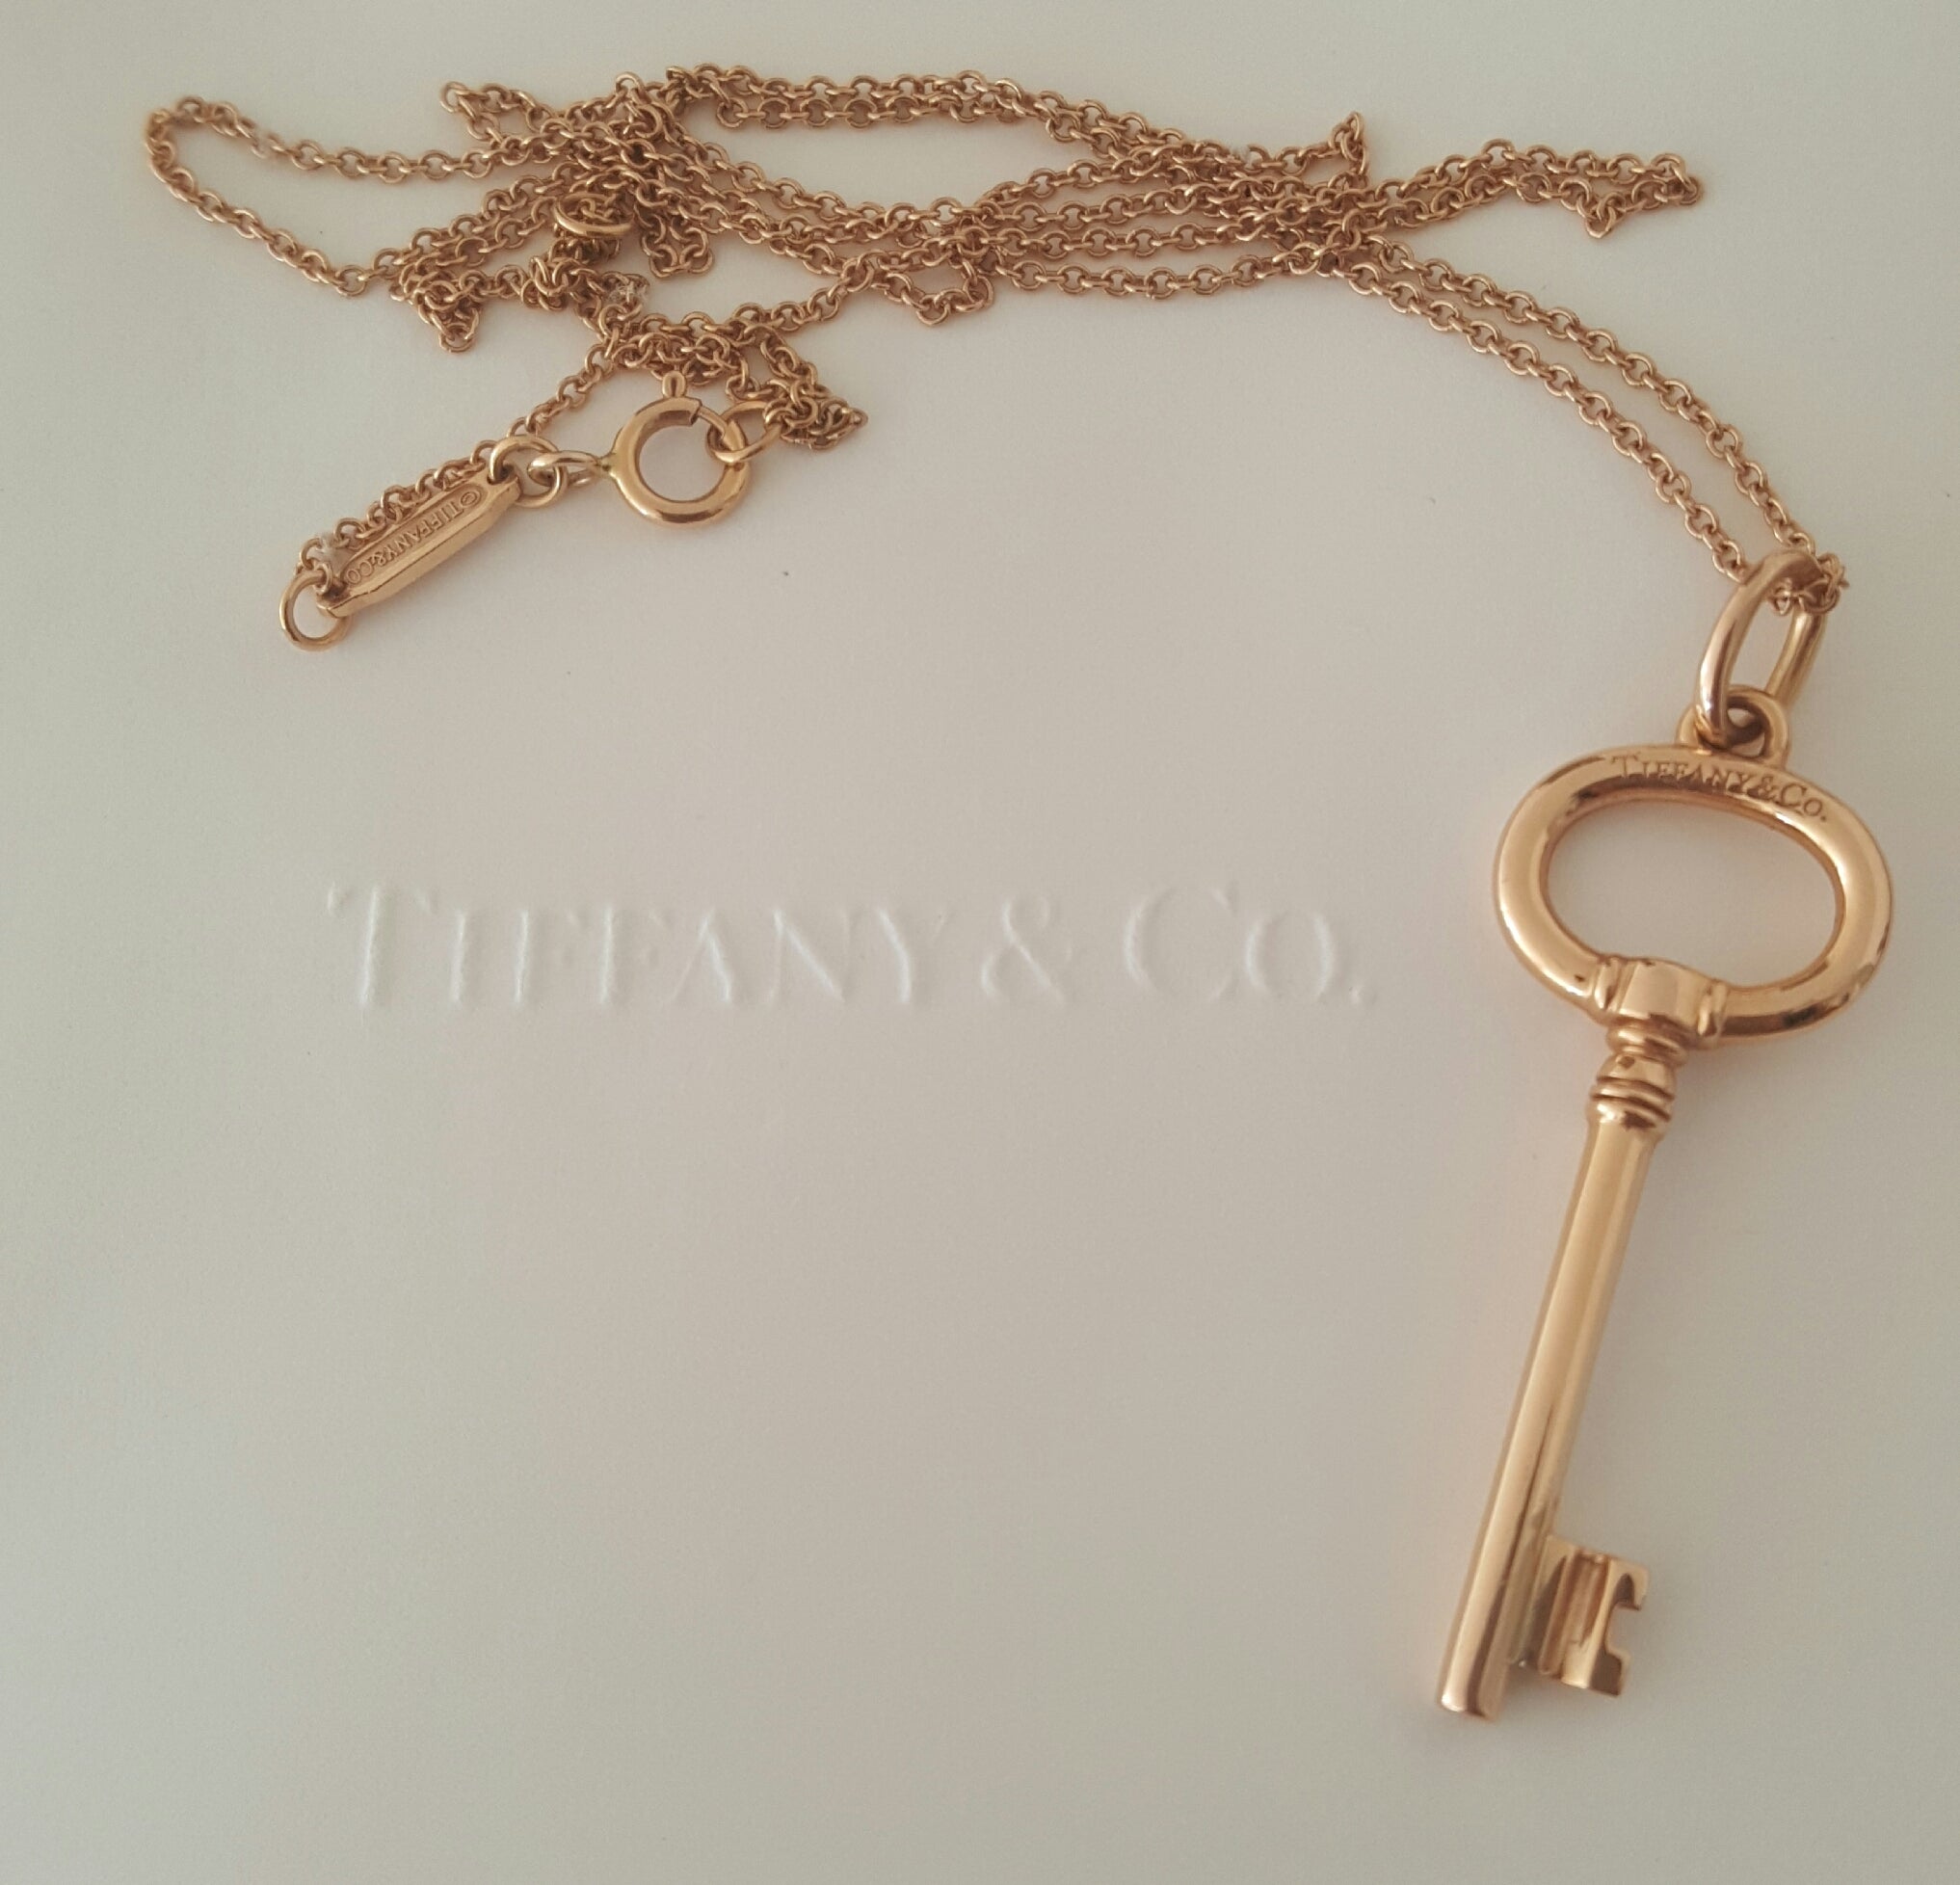 Tiffany & Co 18ct Rose Gold Key Pendant/Necklace 16" adjustable 18ct Chain